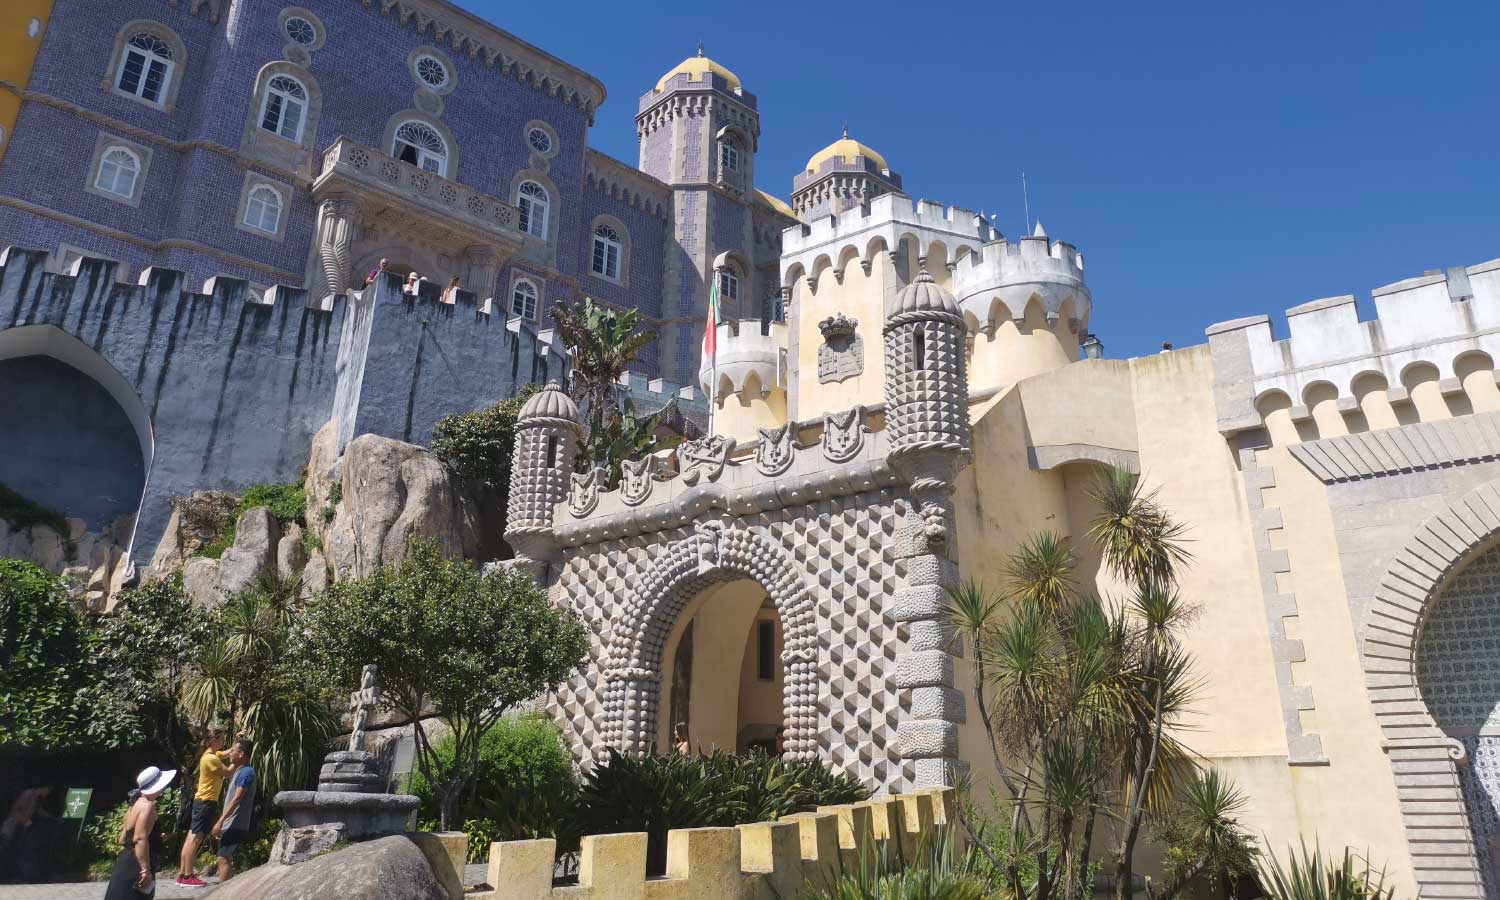 Shows Pena Palace in Sintra - Lisbon travel tips